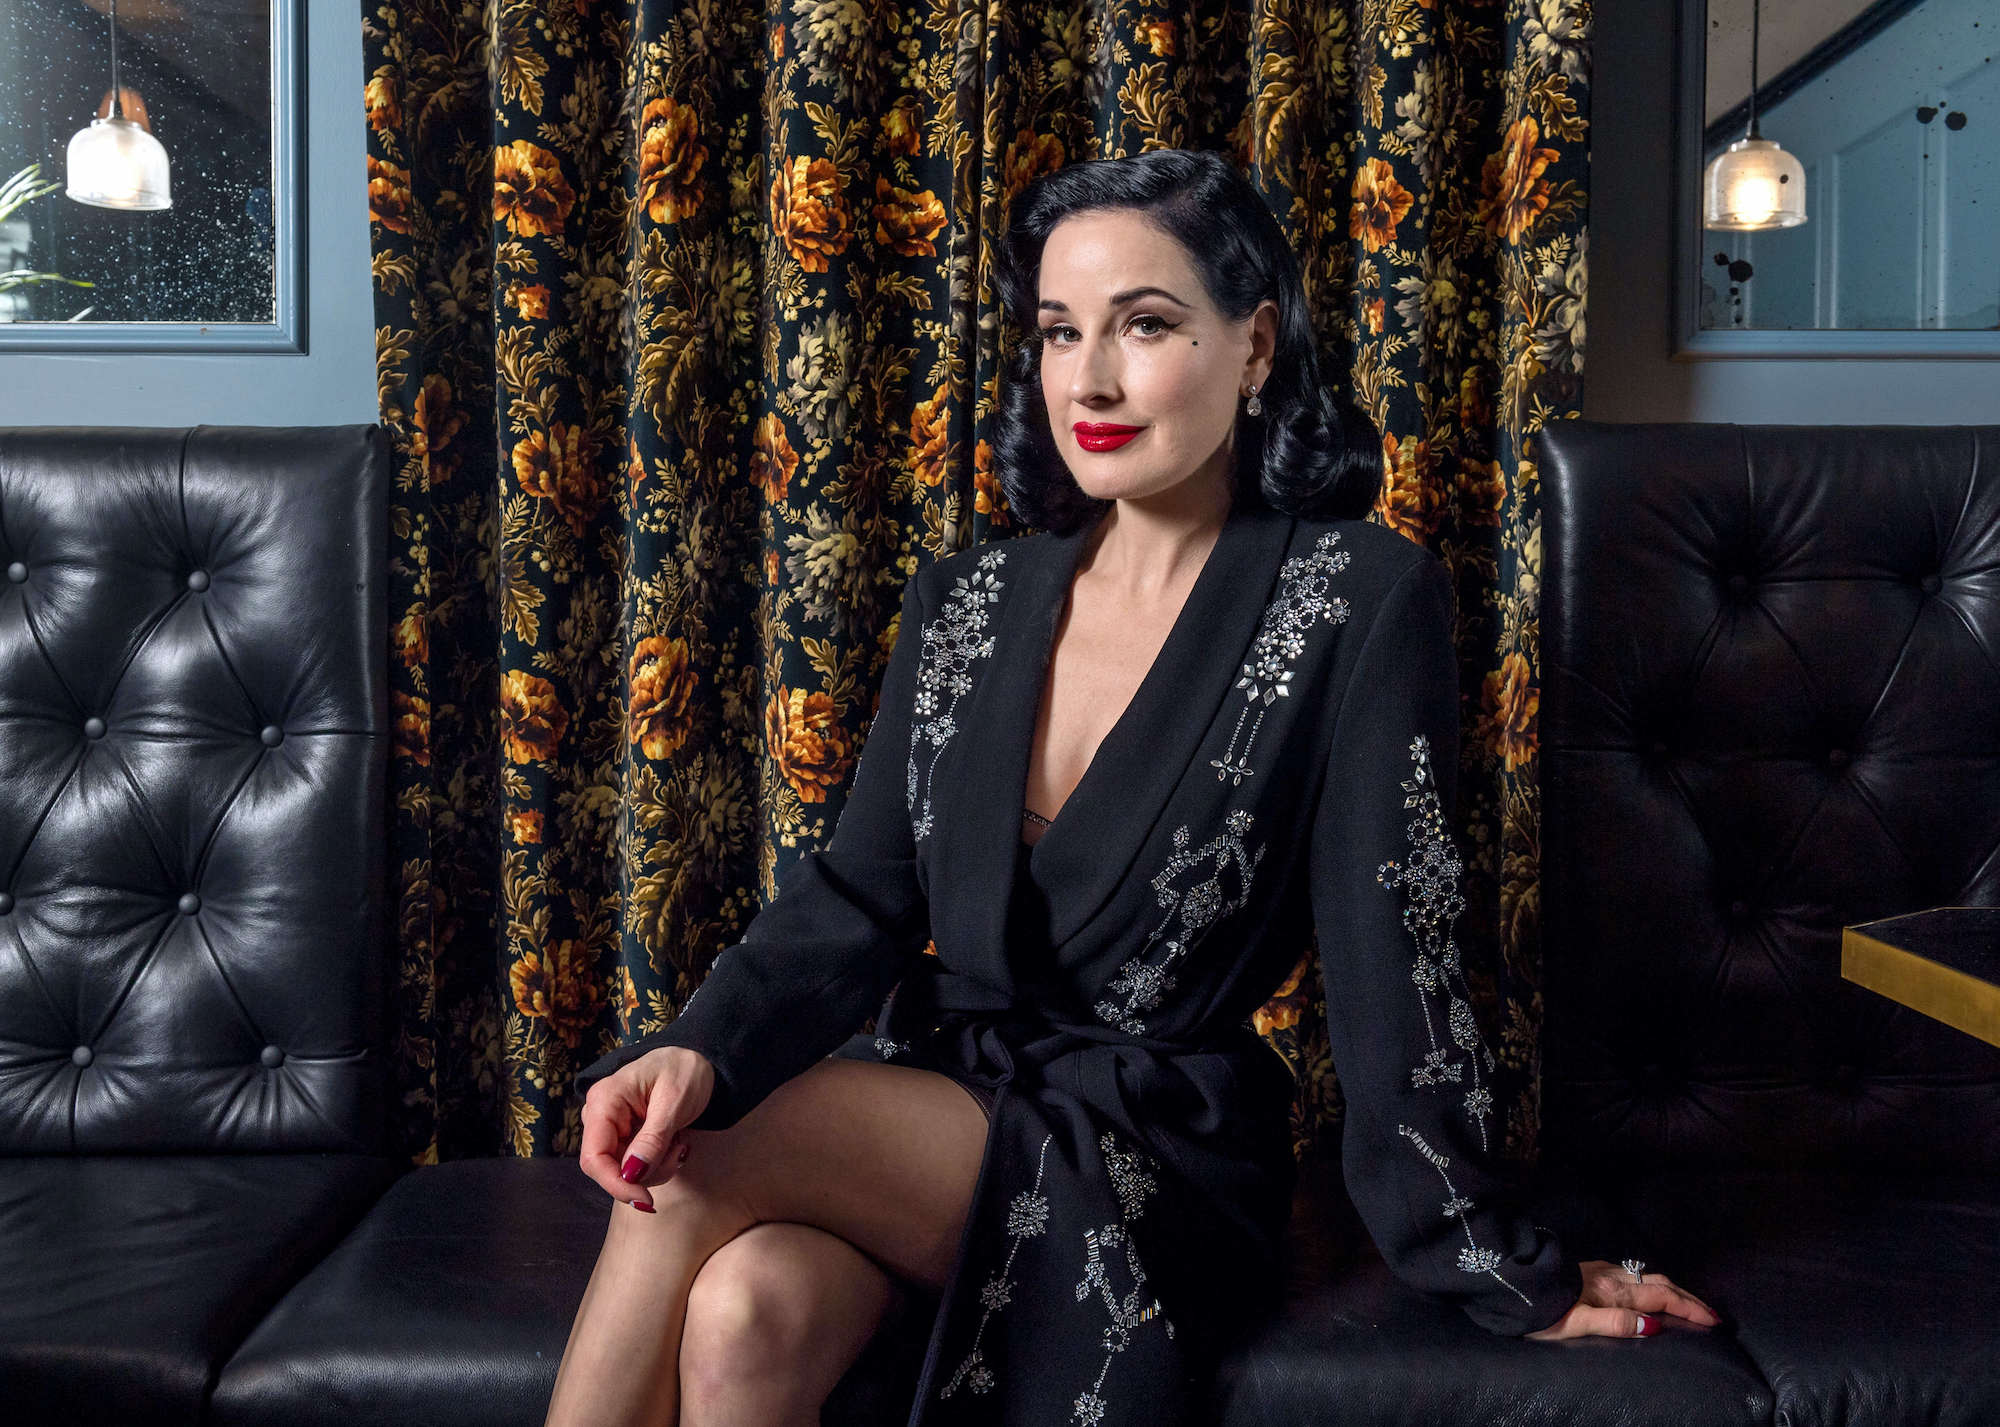 Dita Von Teese sitting on a couch in front of a floral curtain